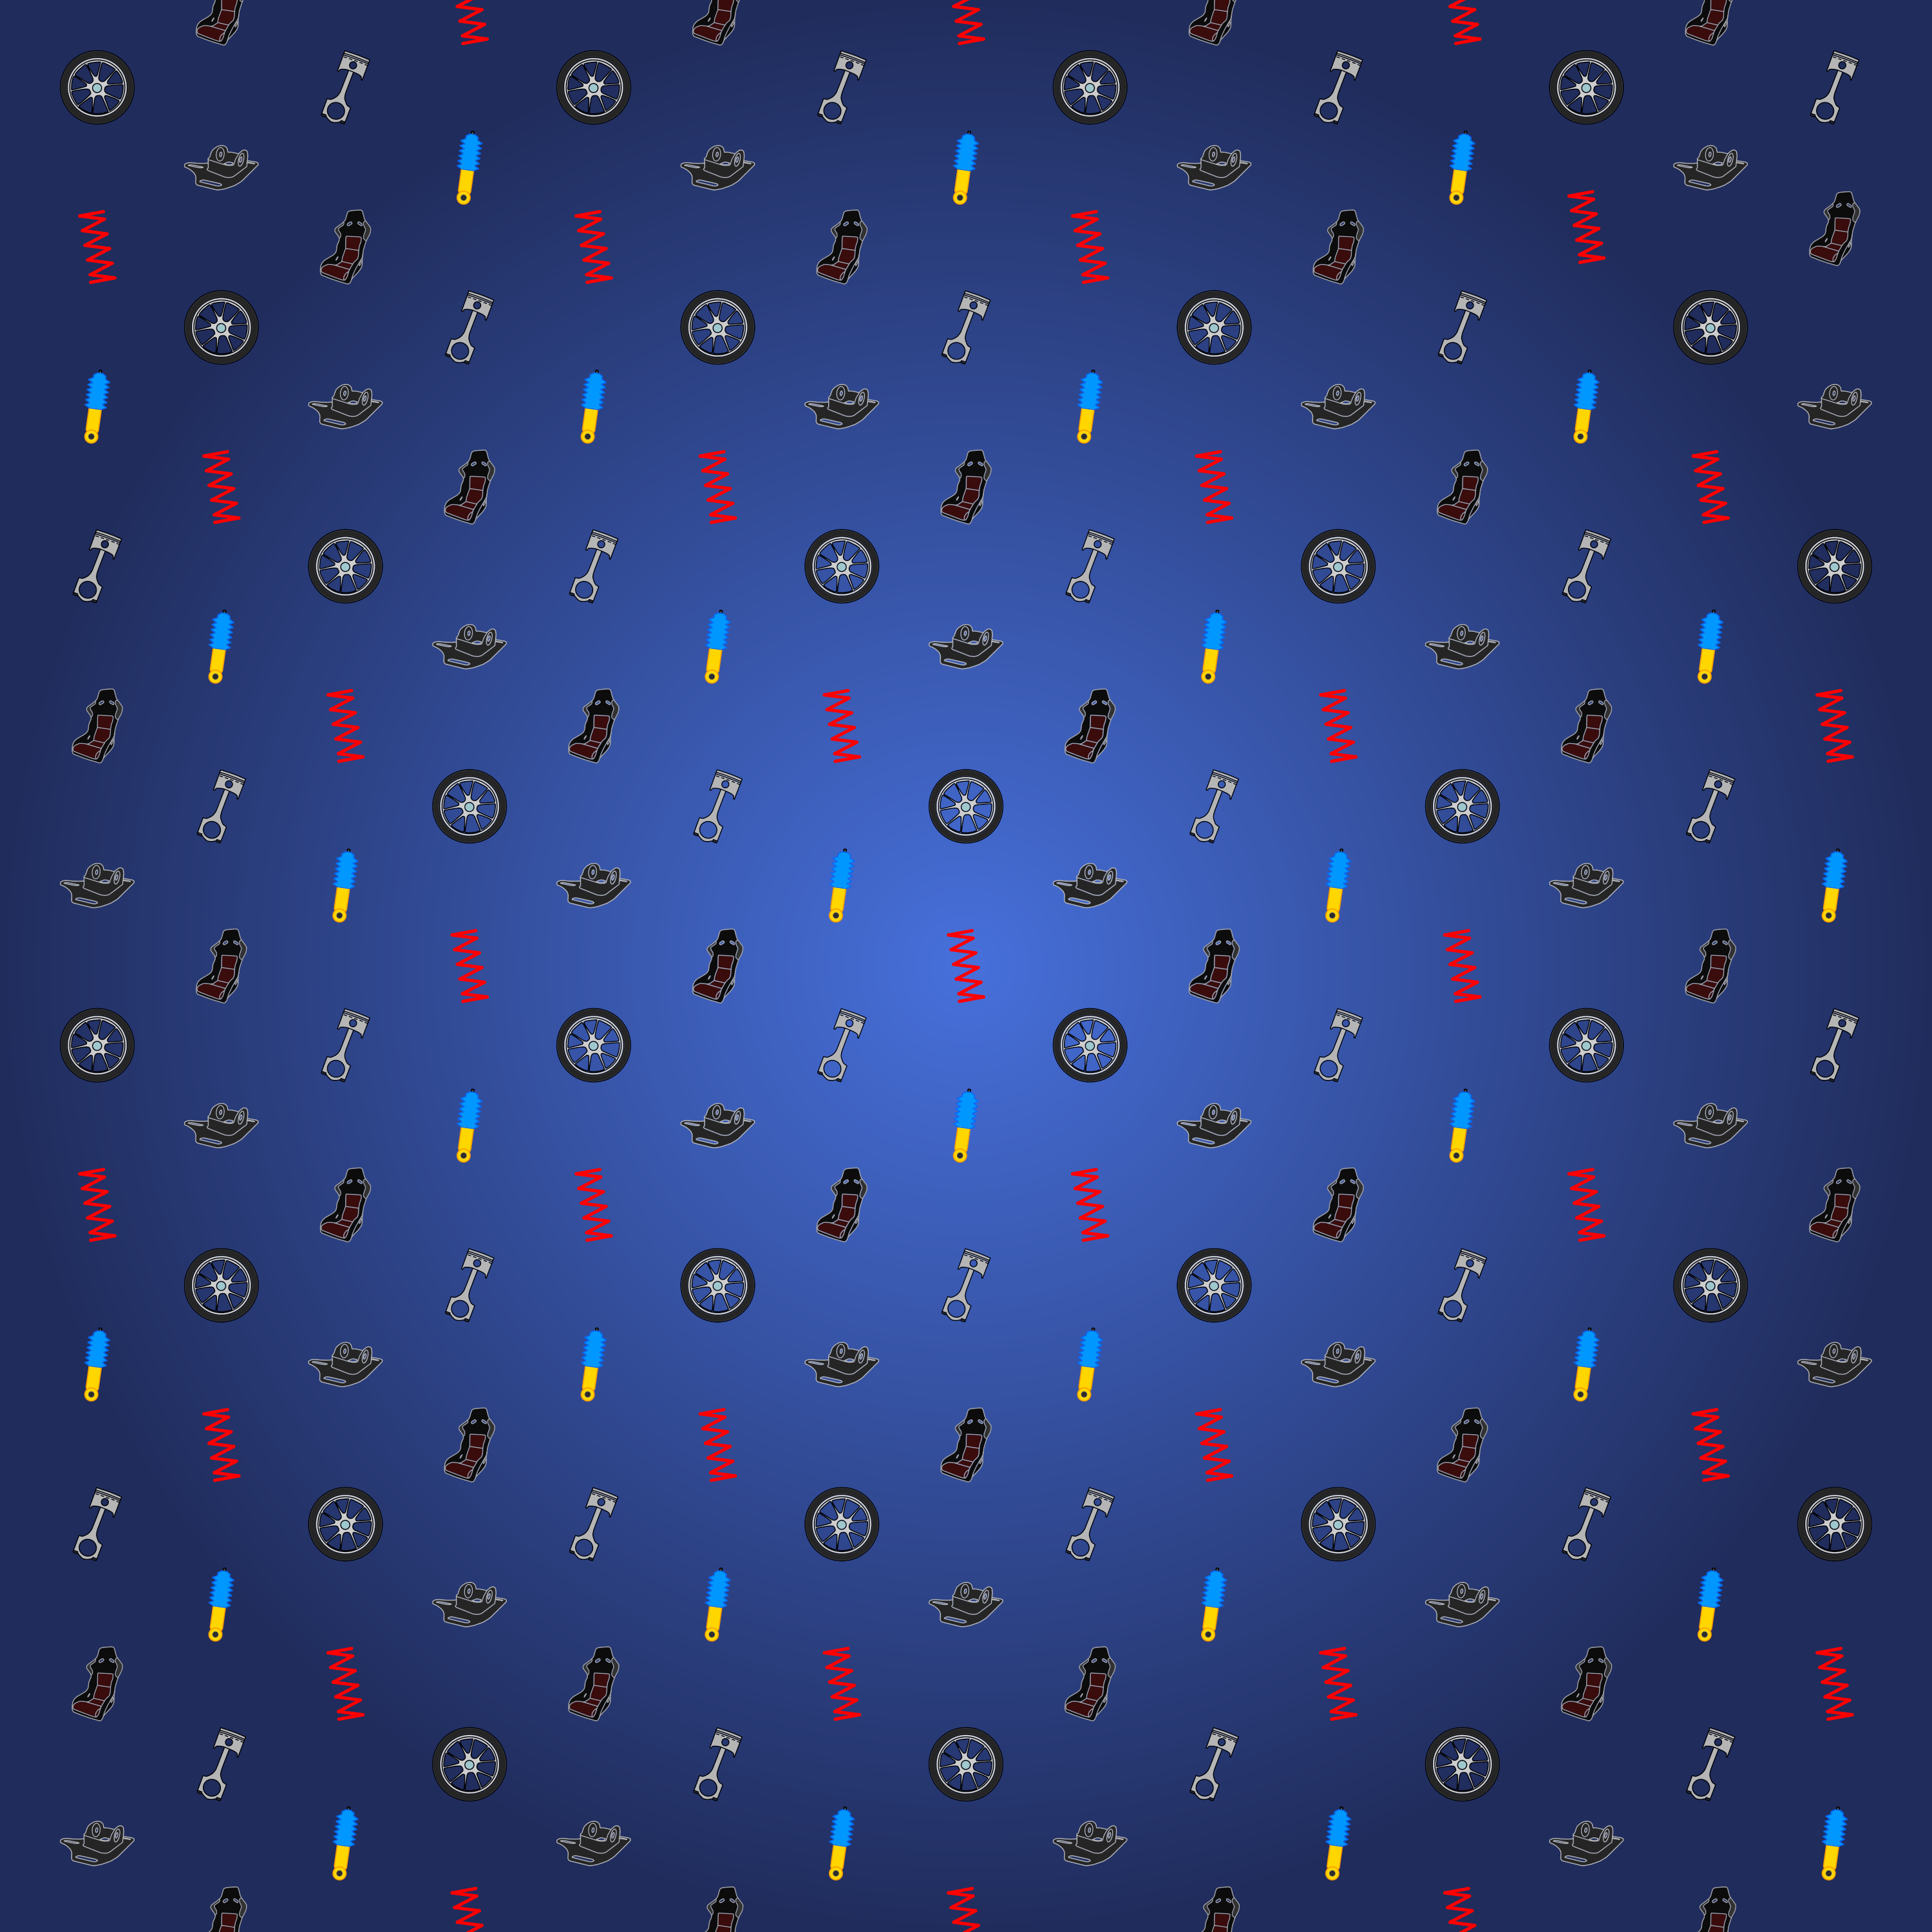 Background pattern with images of cartoon car parts